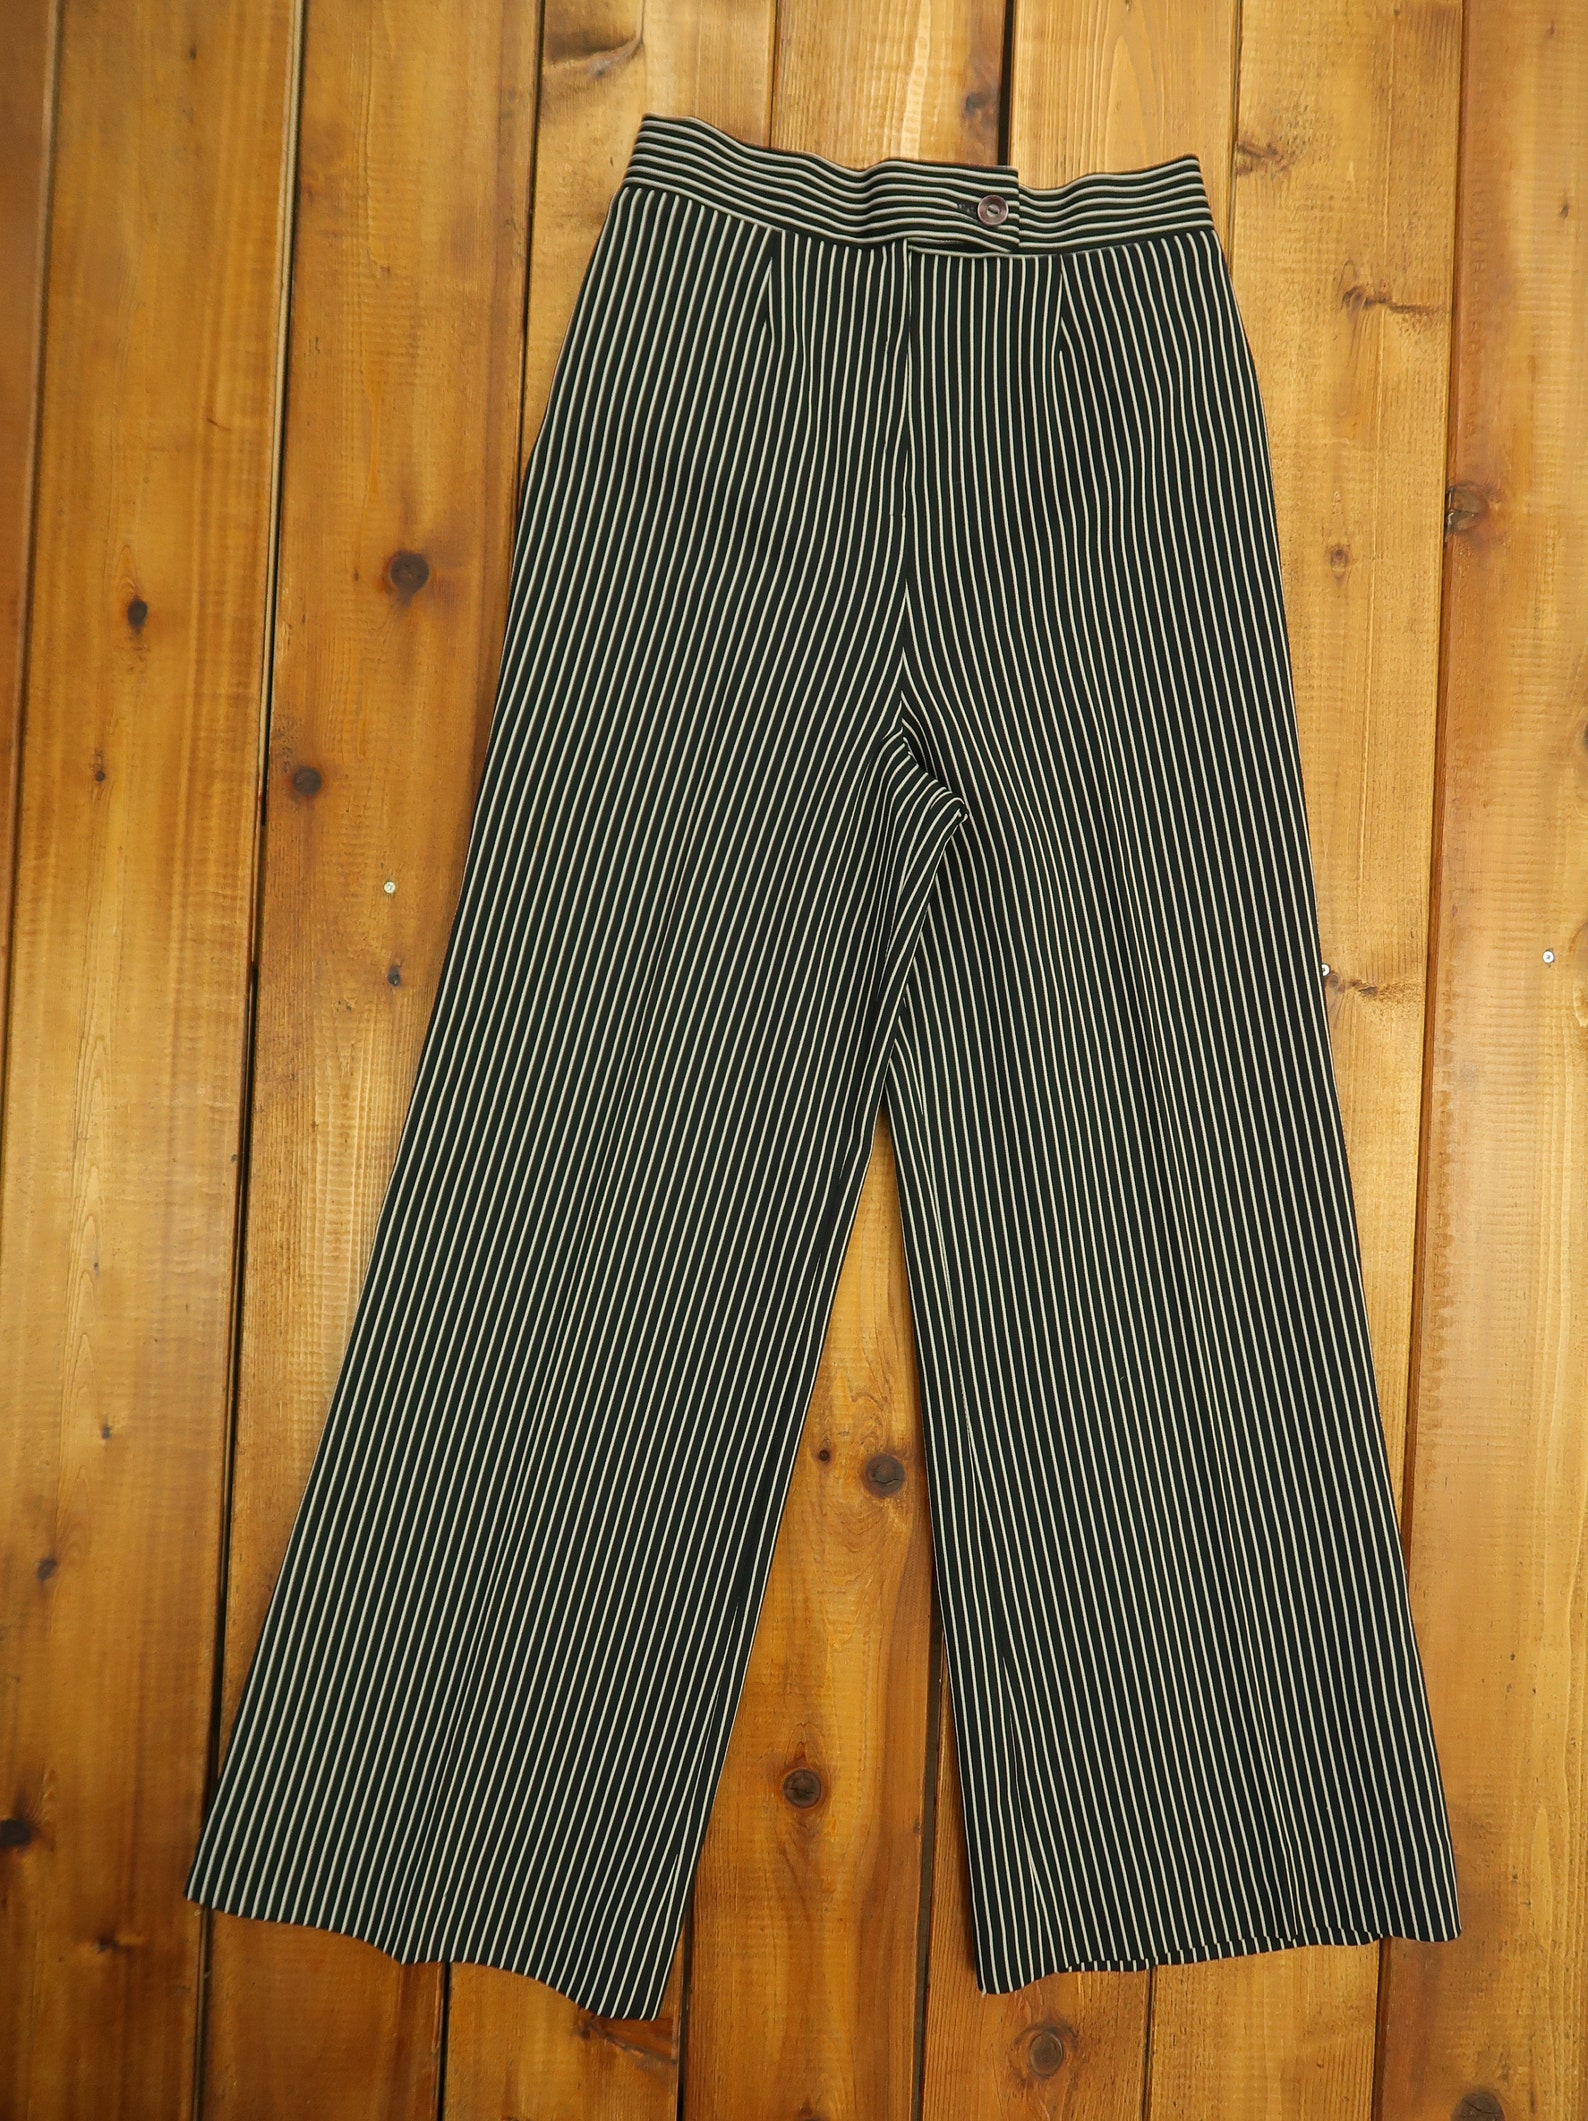 Vintage Pin Striped Women's Trousers Size Medium/Large H11 | Etsy